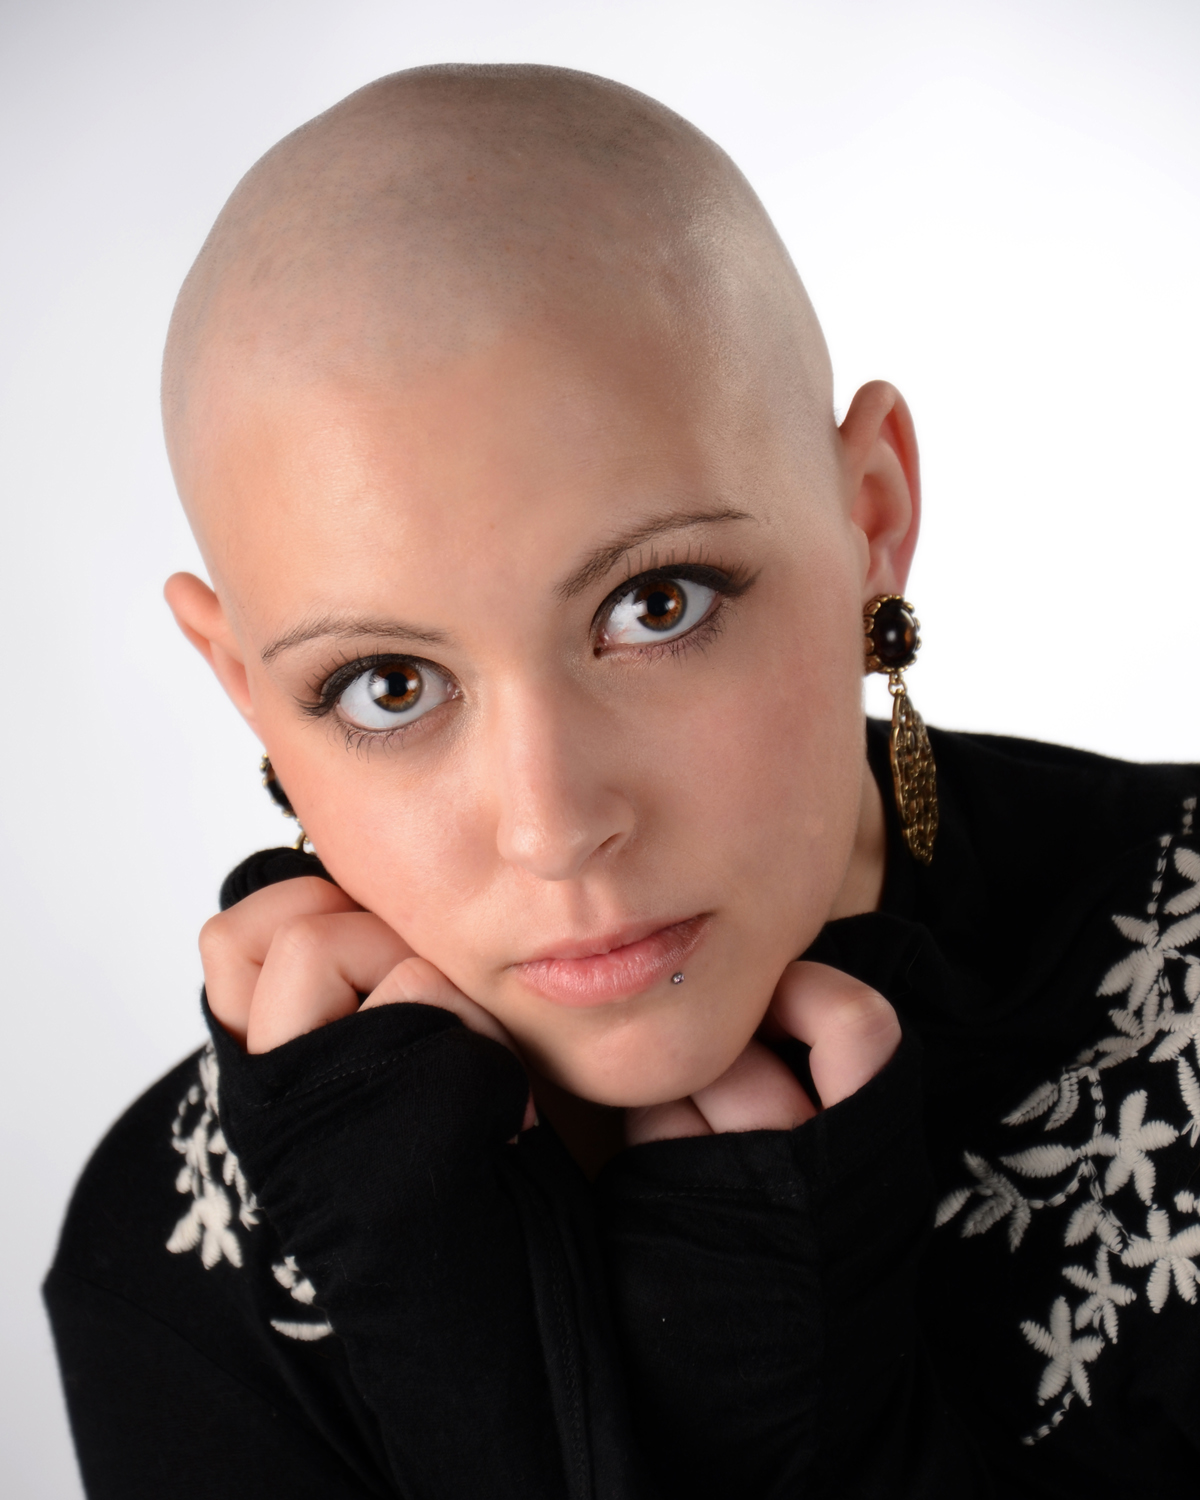 Starting chemo this past spring, Hannah underwent treatments every two week...